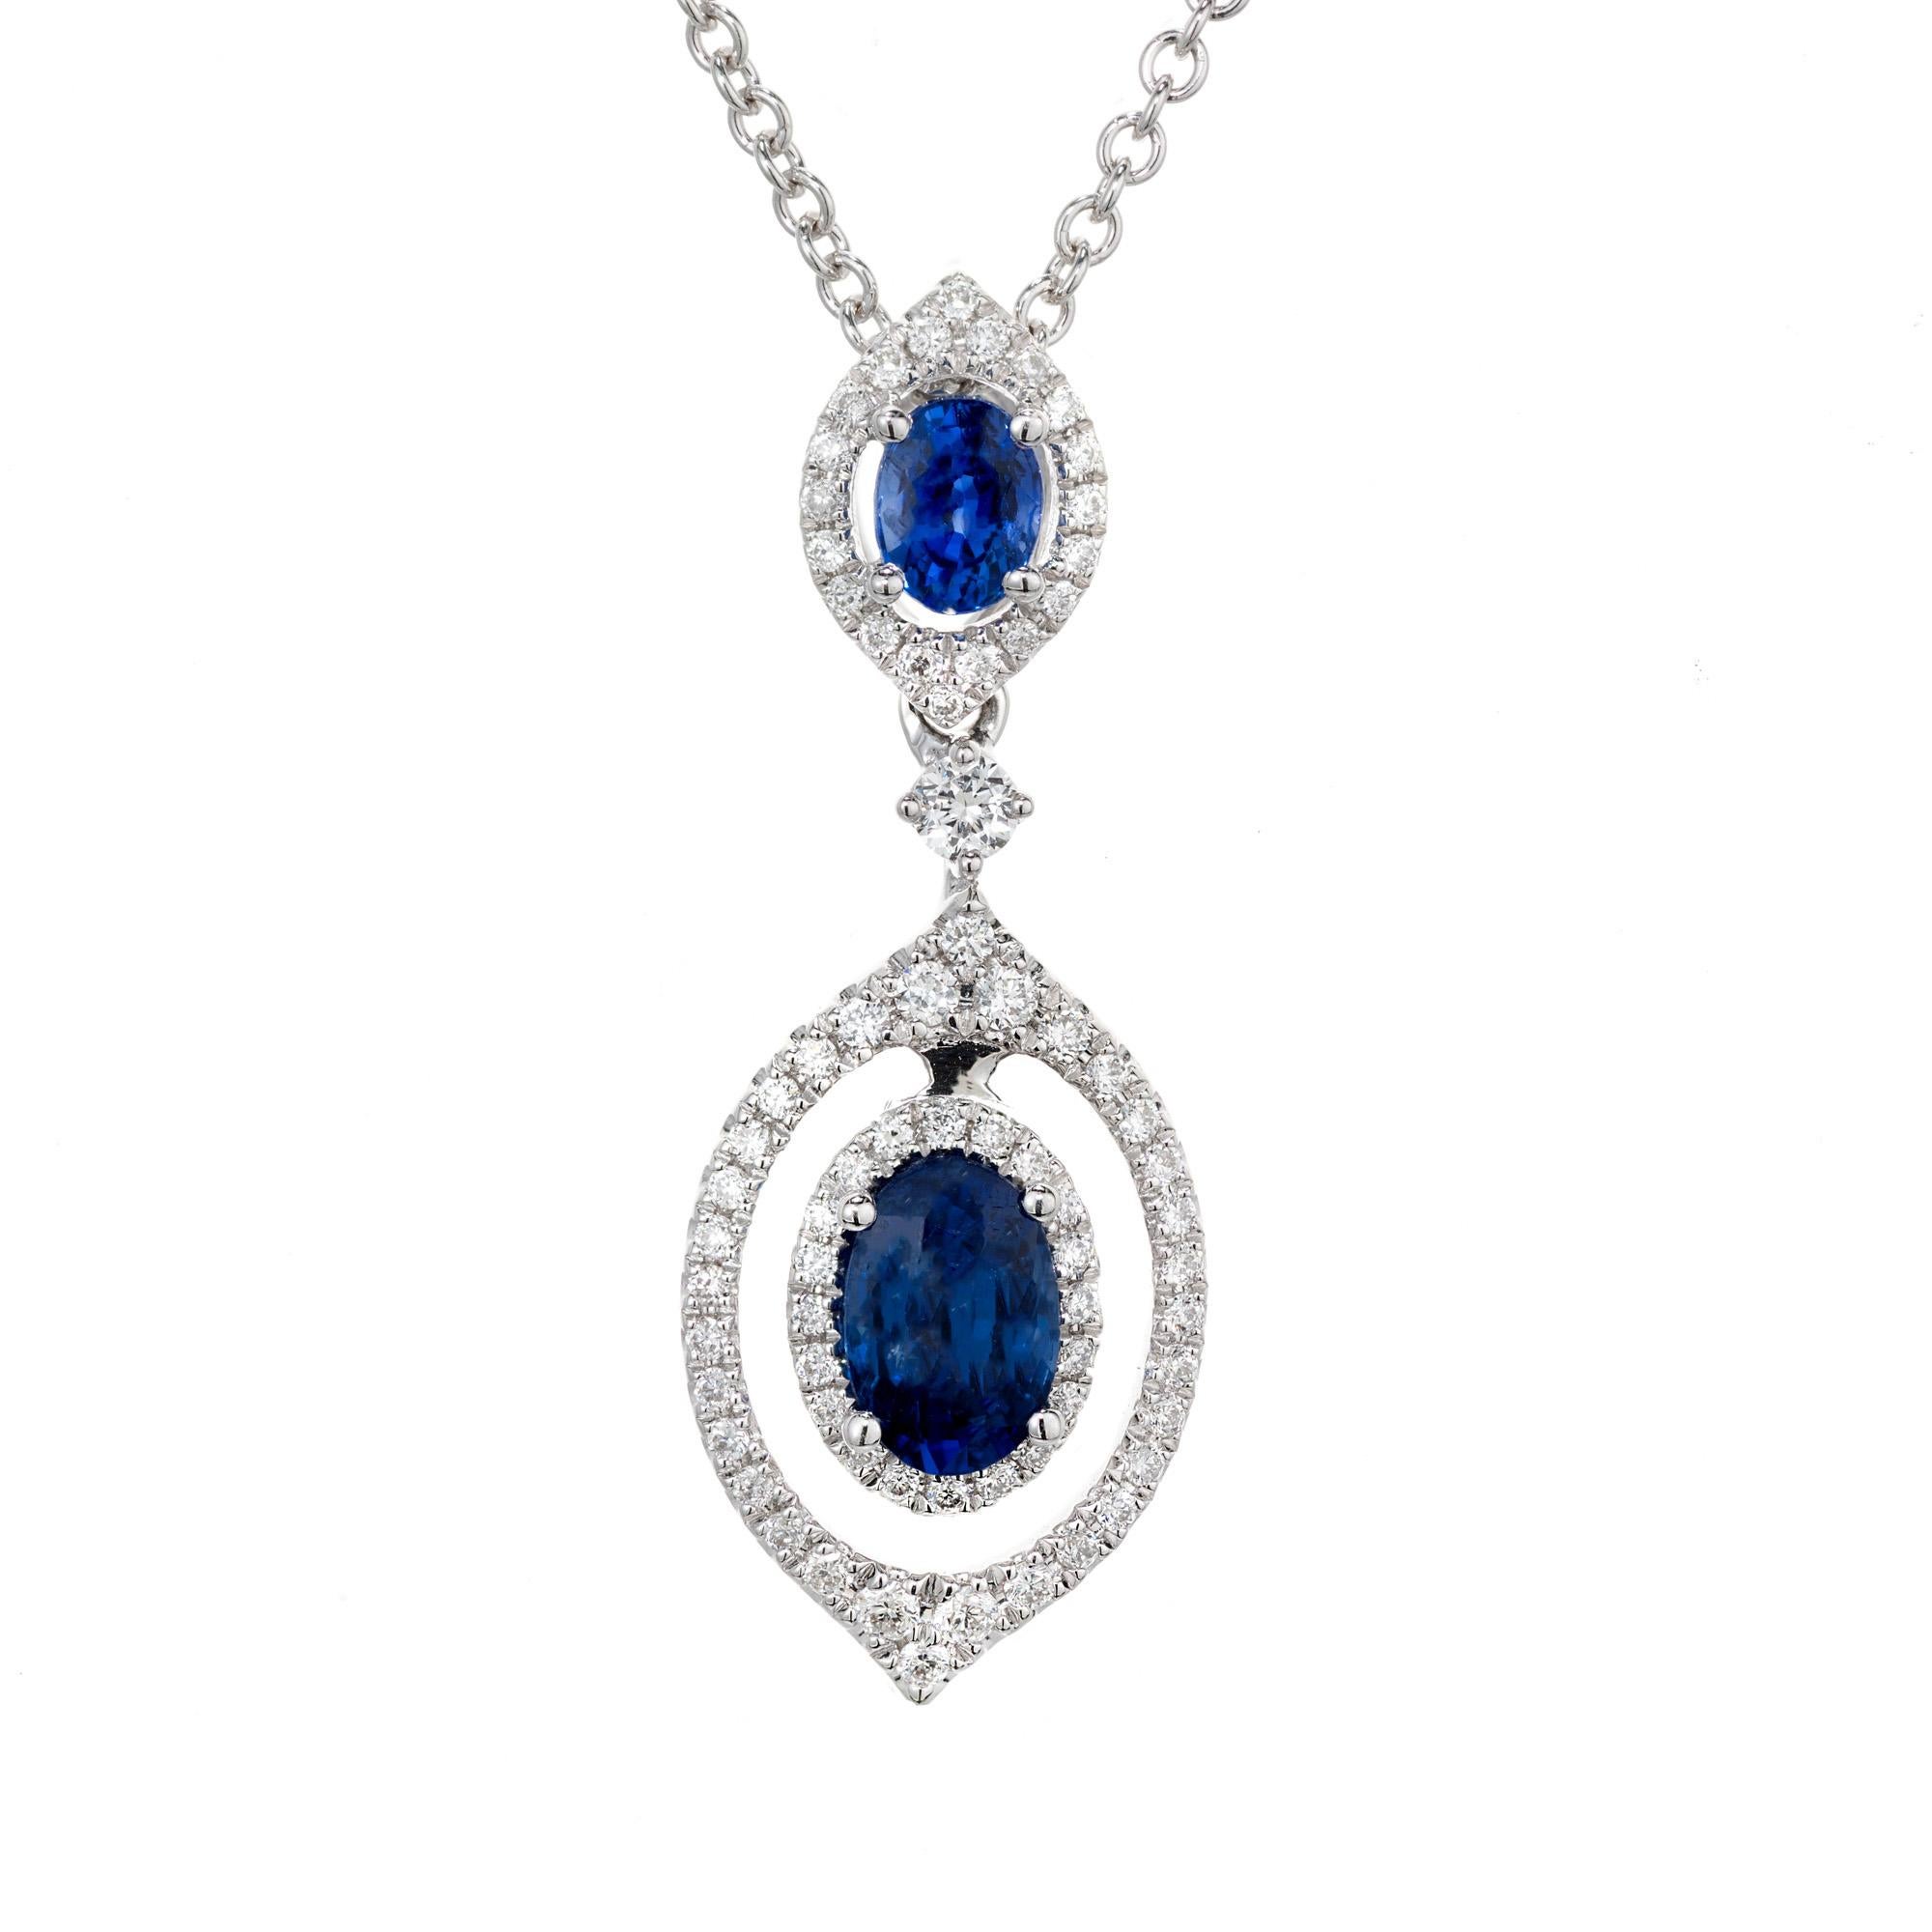 Sapphire and diamond 18k white gold pendant necklace. 2 oval sapphires with halos of round cut diamonds. A single cut single cut diamond separates the two sapphires. The bottom sapphire dangles and has a double halo. 16 inch 18k white gold chain.